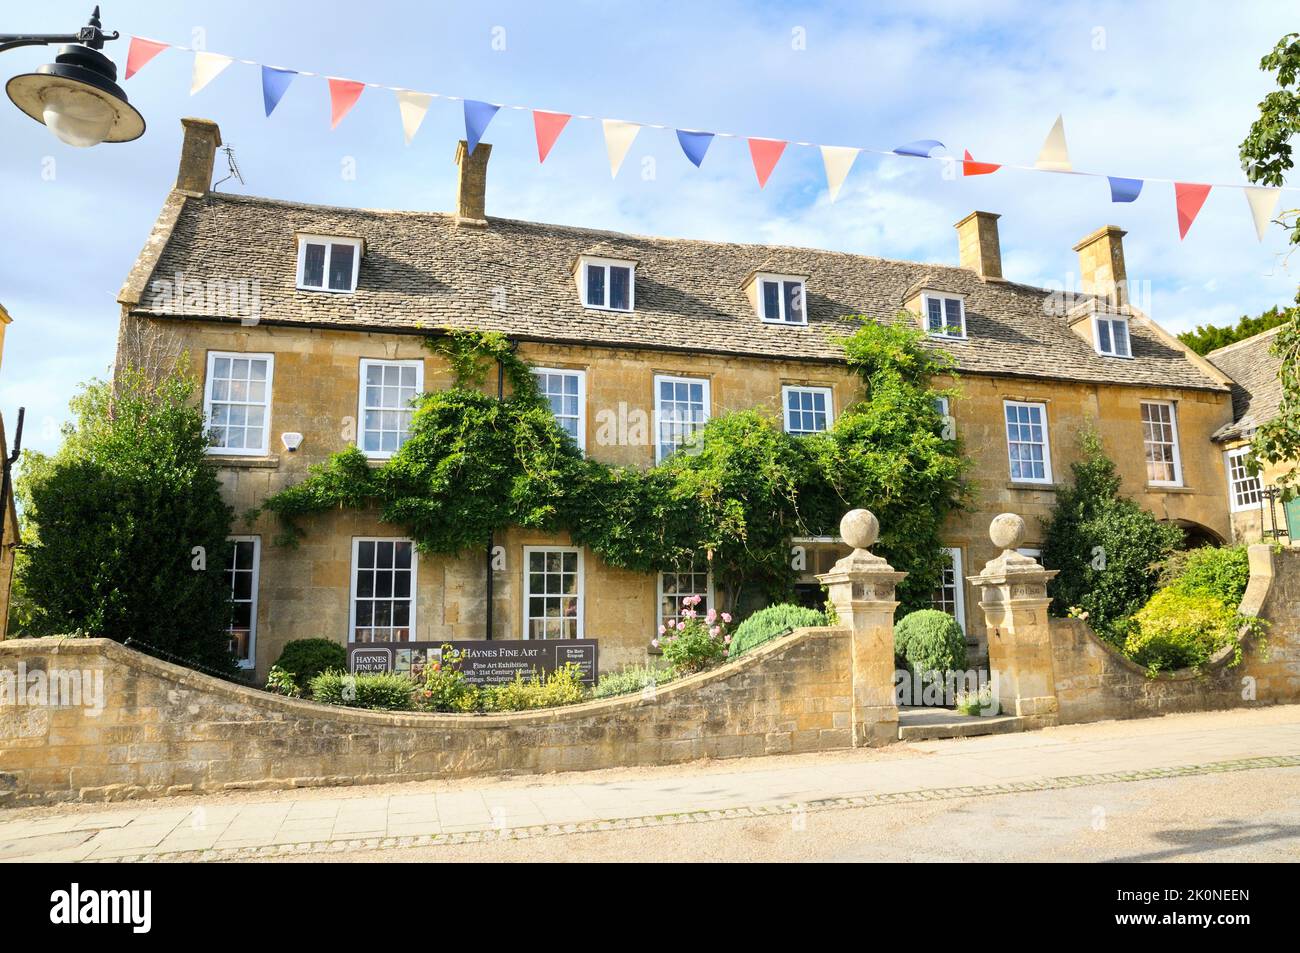 Haynes Fine Art Gallery at Picton House, an art dealers in the picturesque Cotswold village of Broadway, Cotswolds, Worcestershire, England, UK Stock Photo